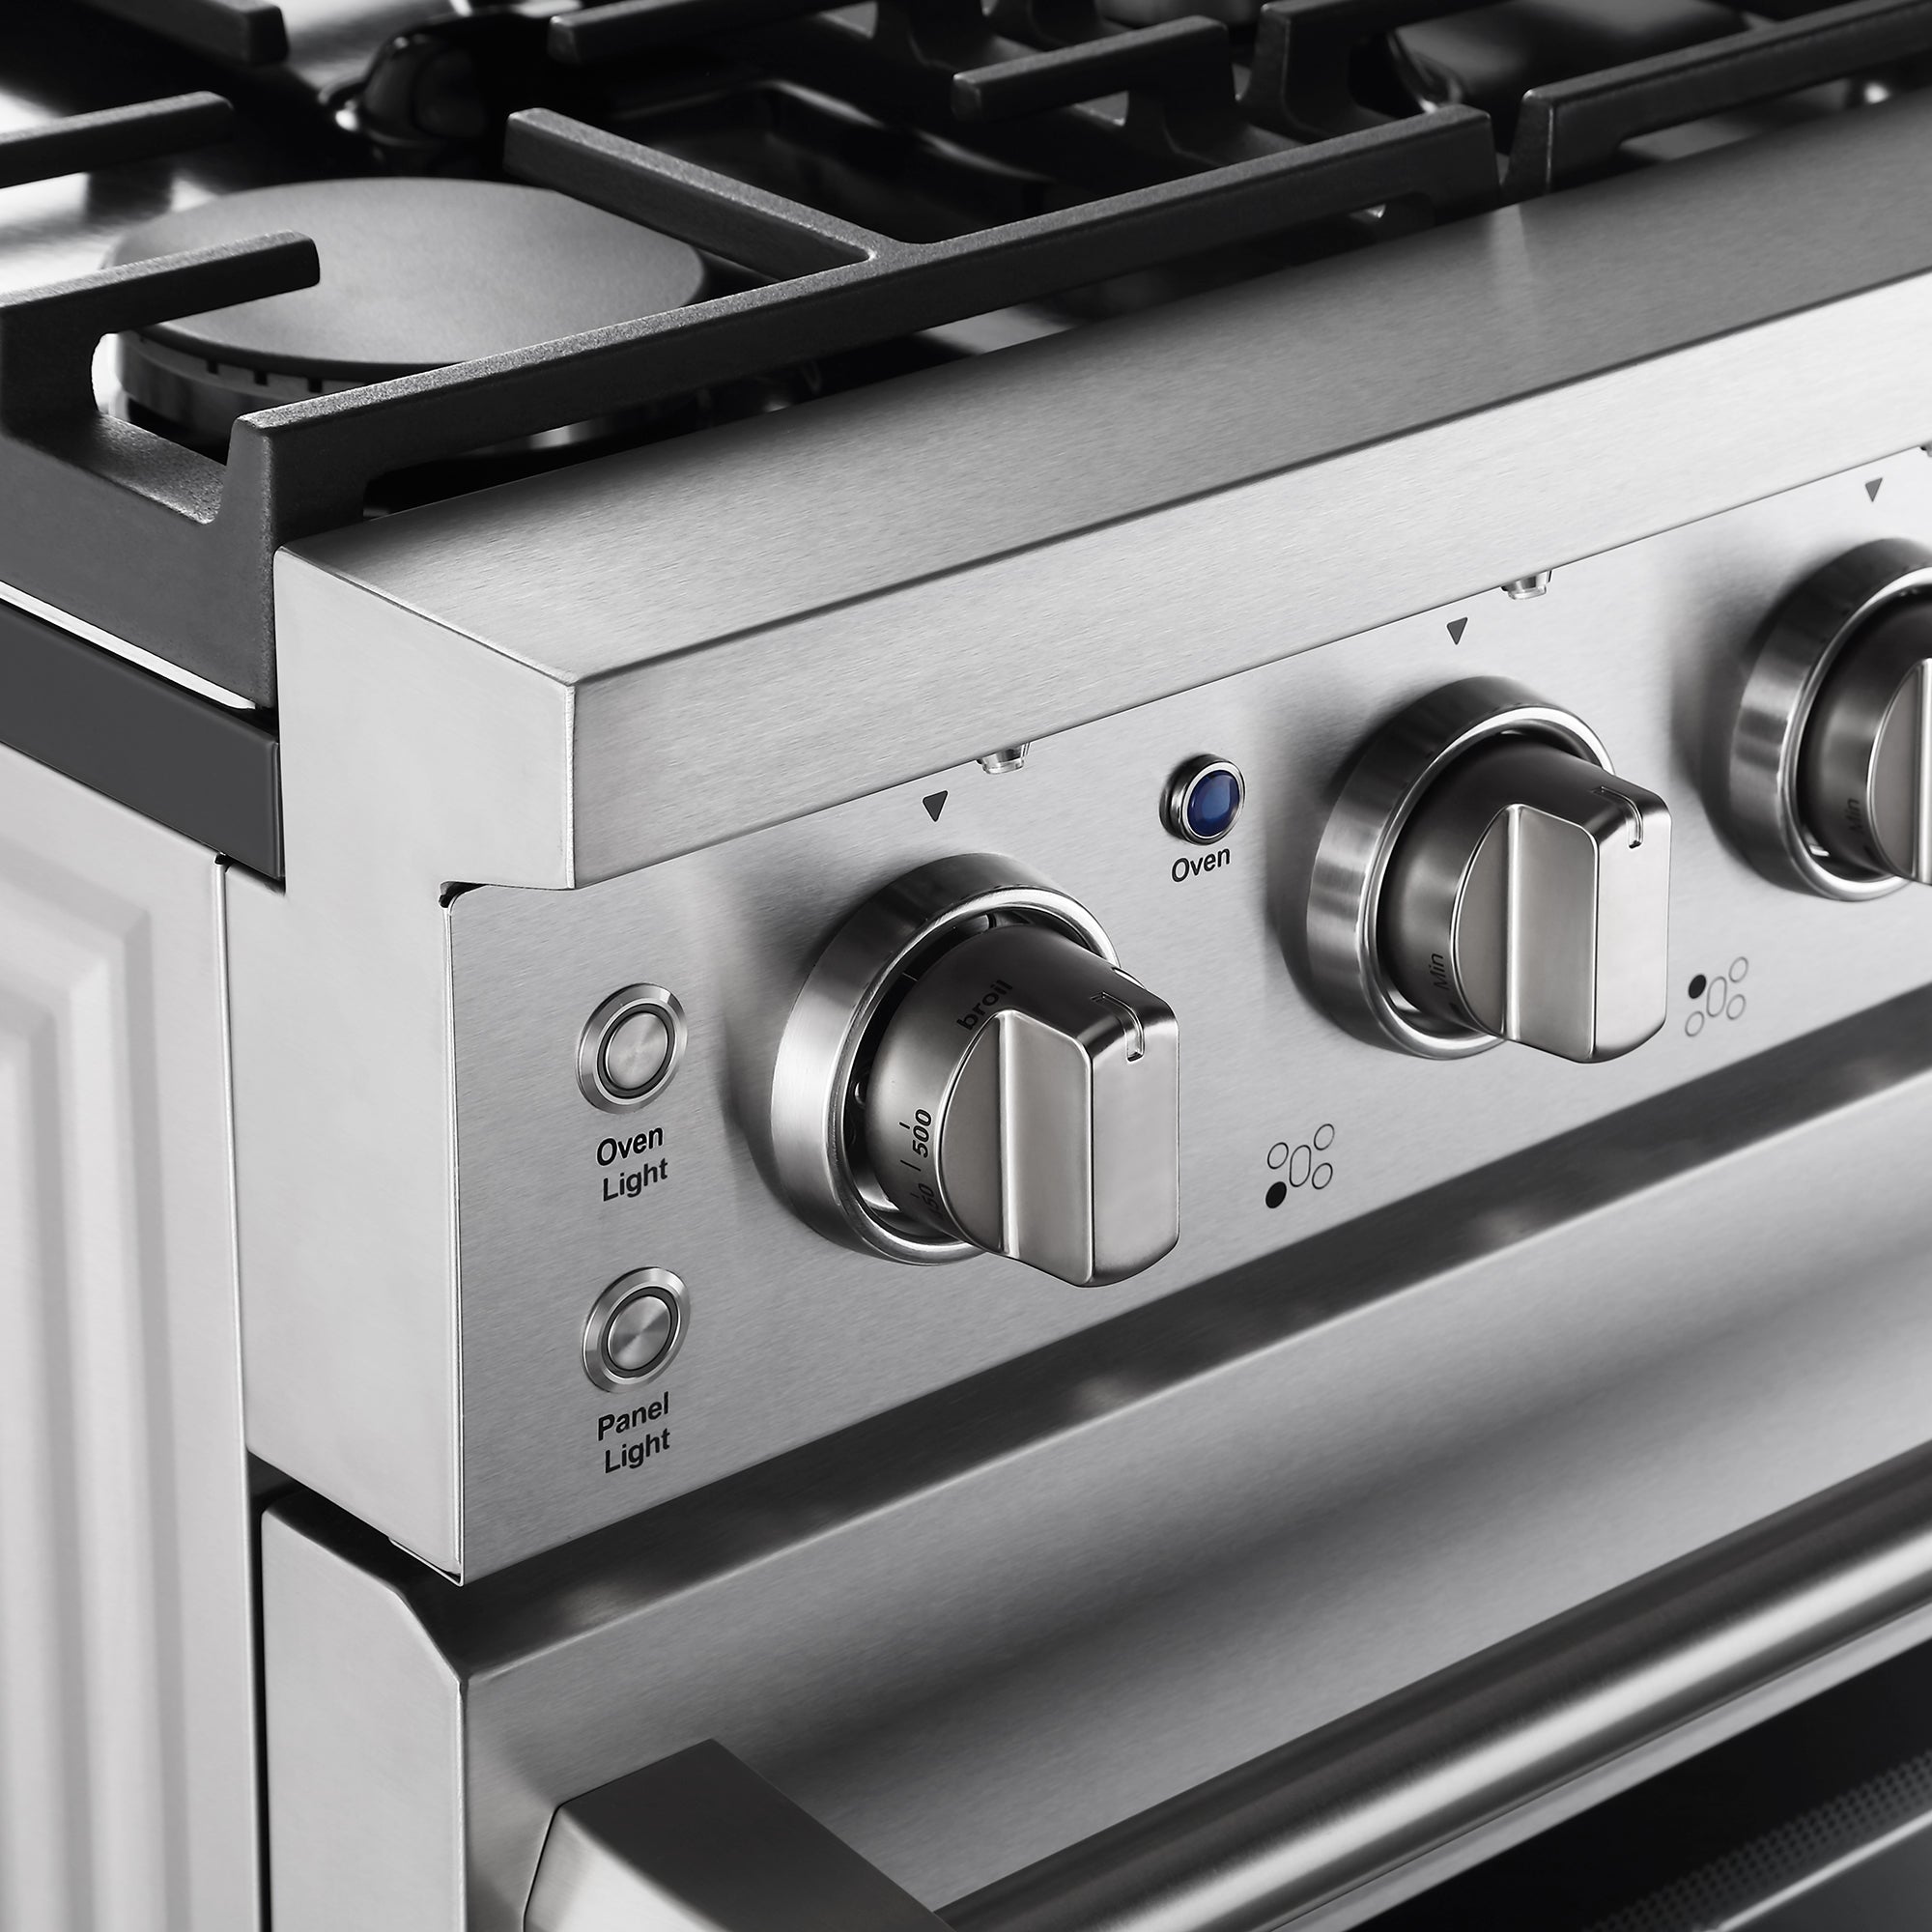 Empava 30 In. Pro-Style Freestanding Gas on Gas Range in Stainless Steel (30GR10)